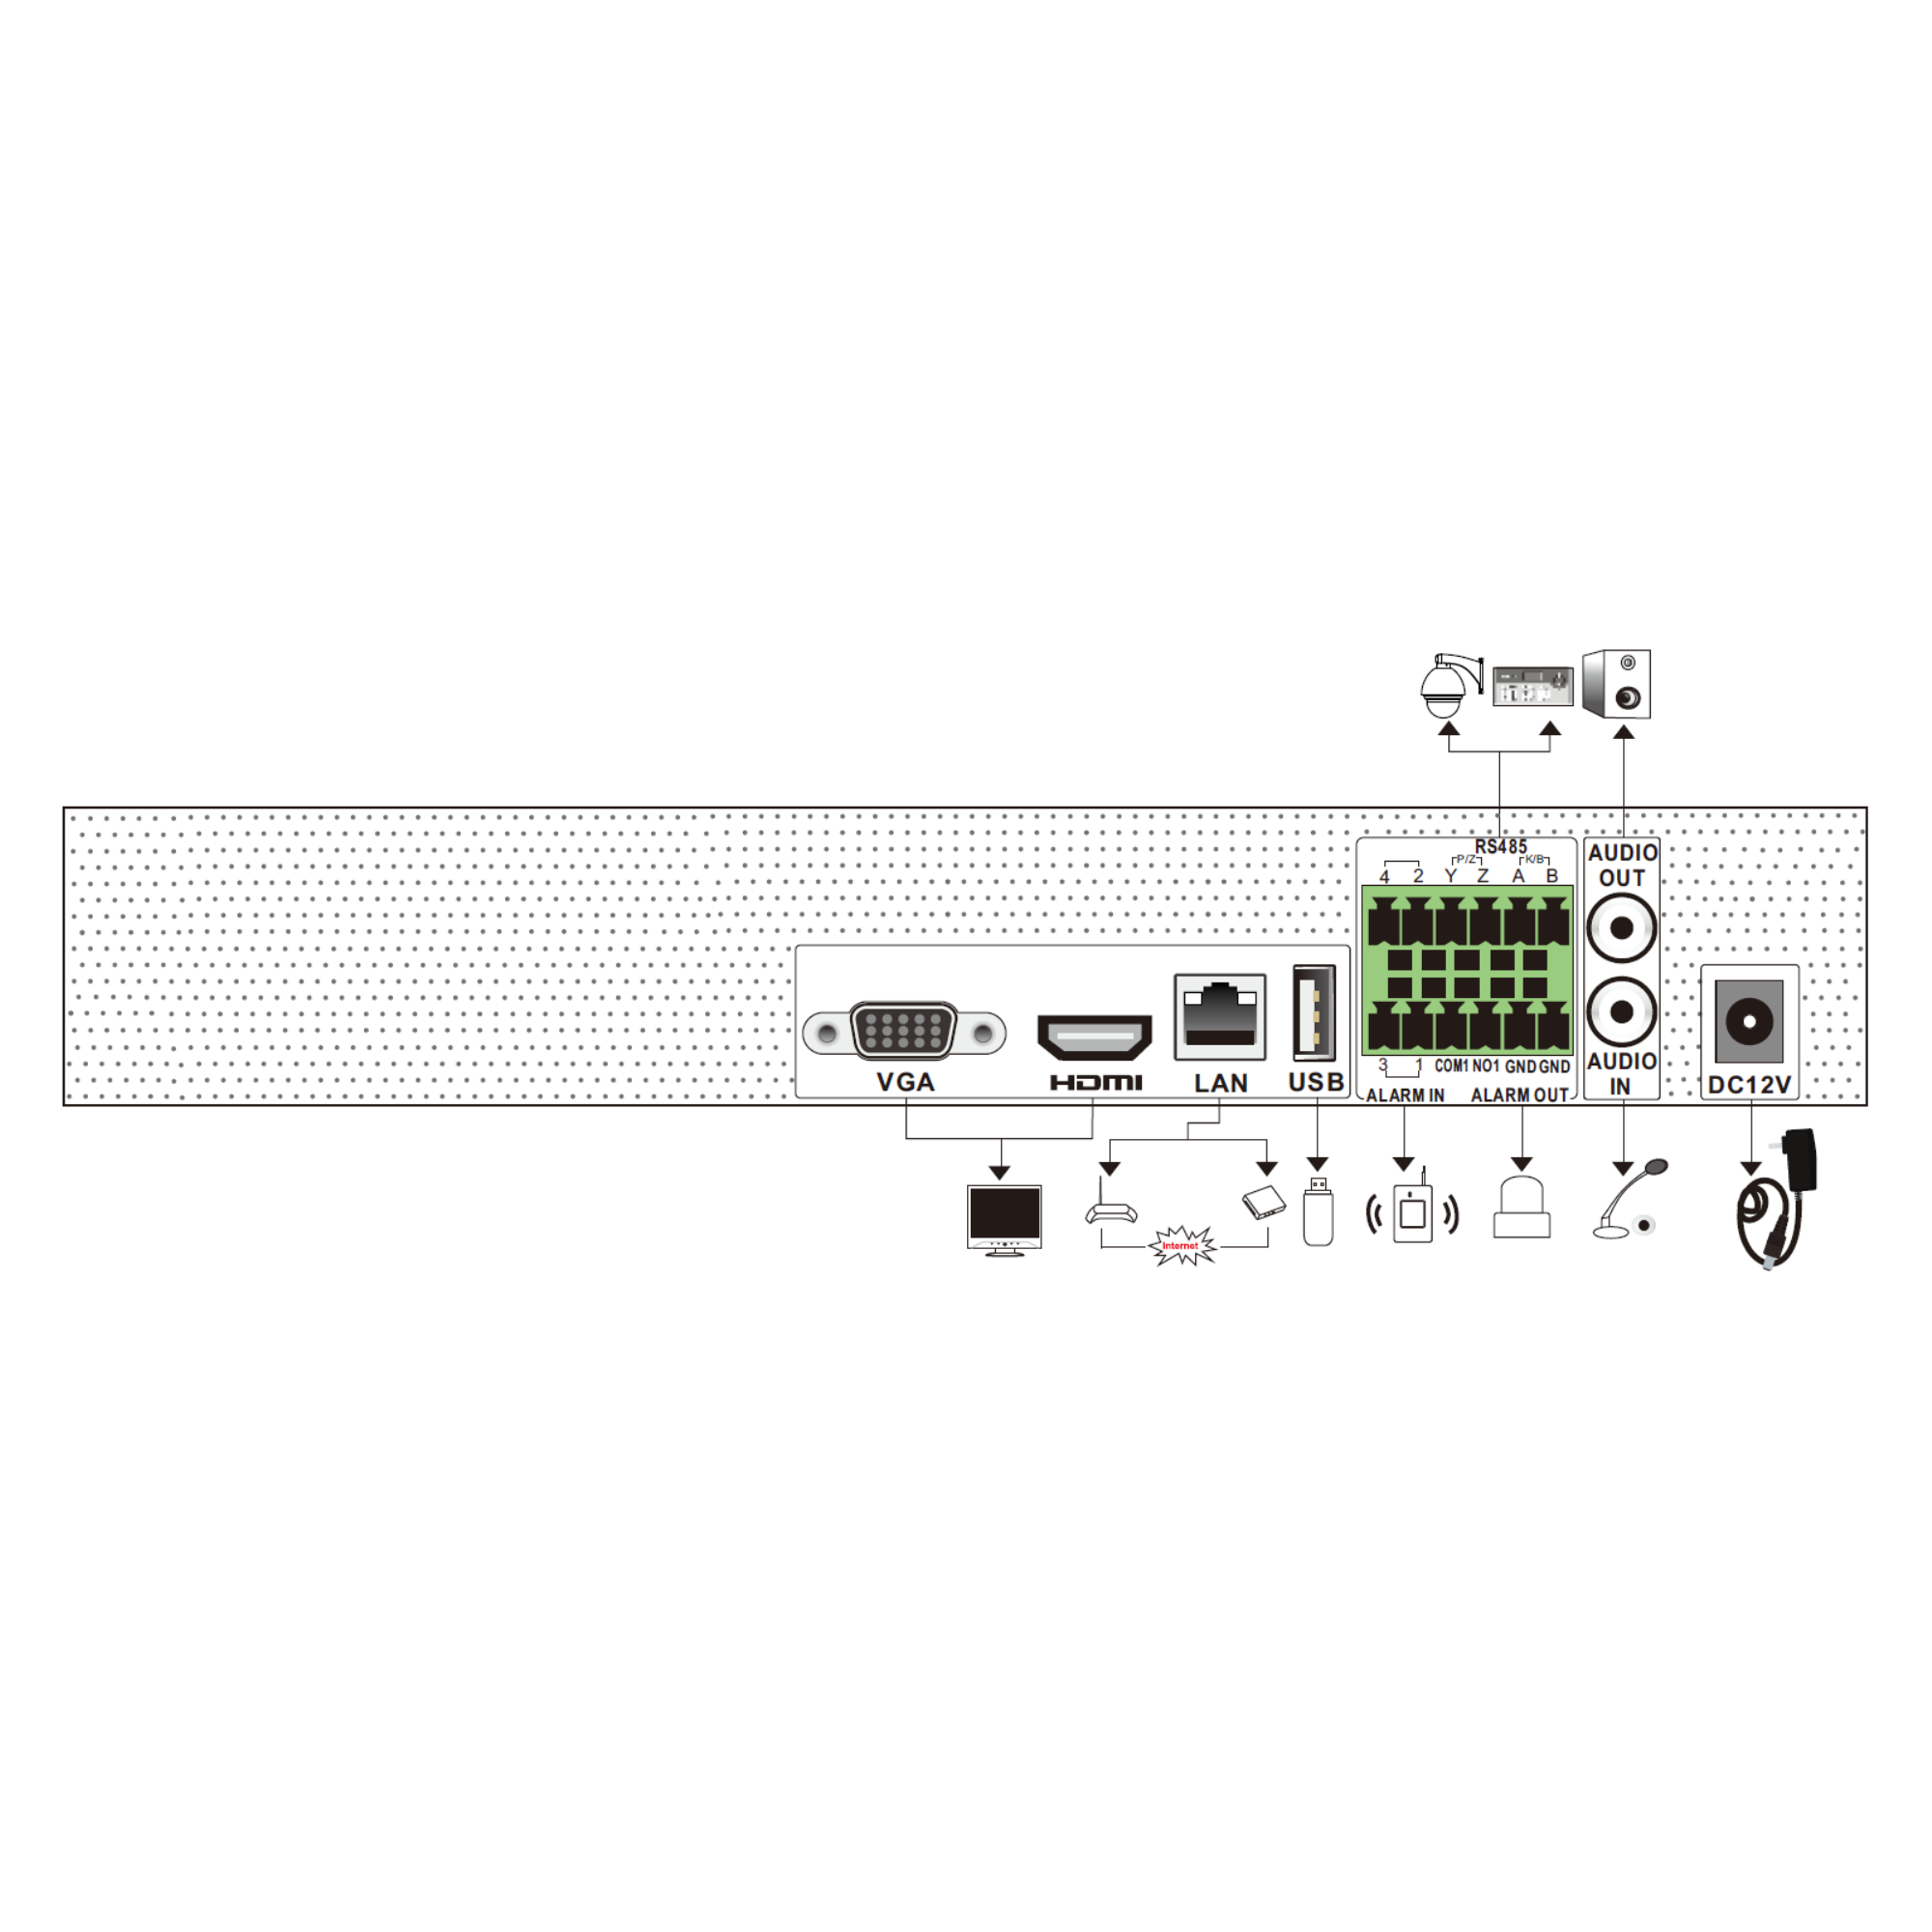 4K NVR Security 32-Channel Up to 8MP, Intelligent Features, Two-Way Audio & Onvif, NVR Surveillance Ultimate-I Series